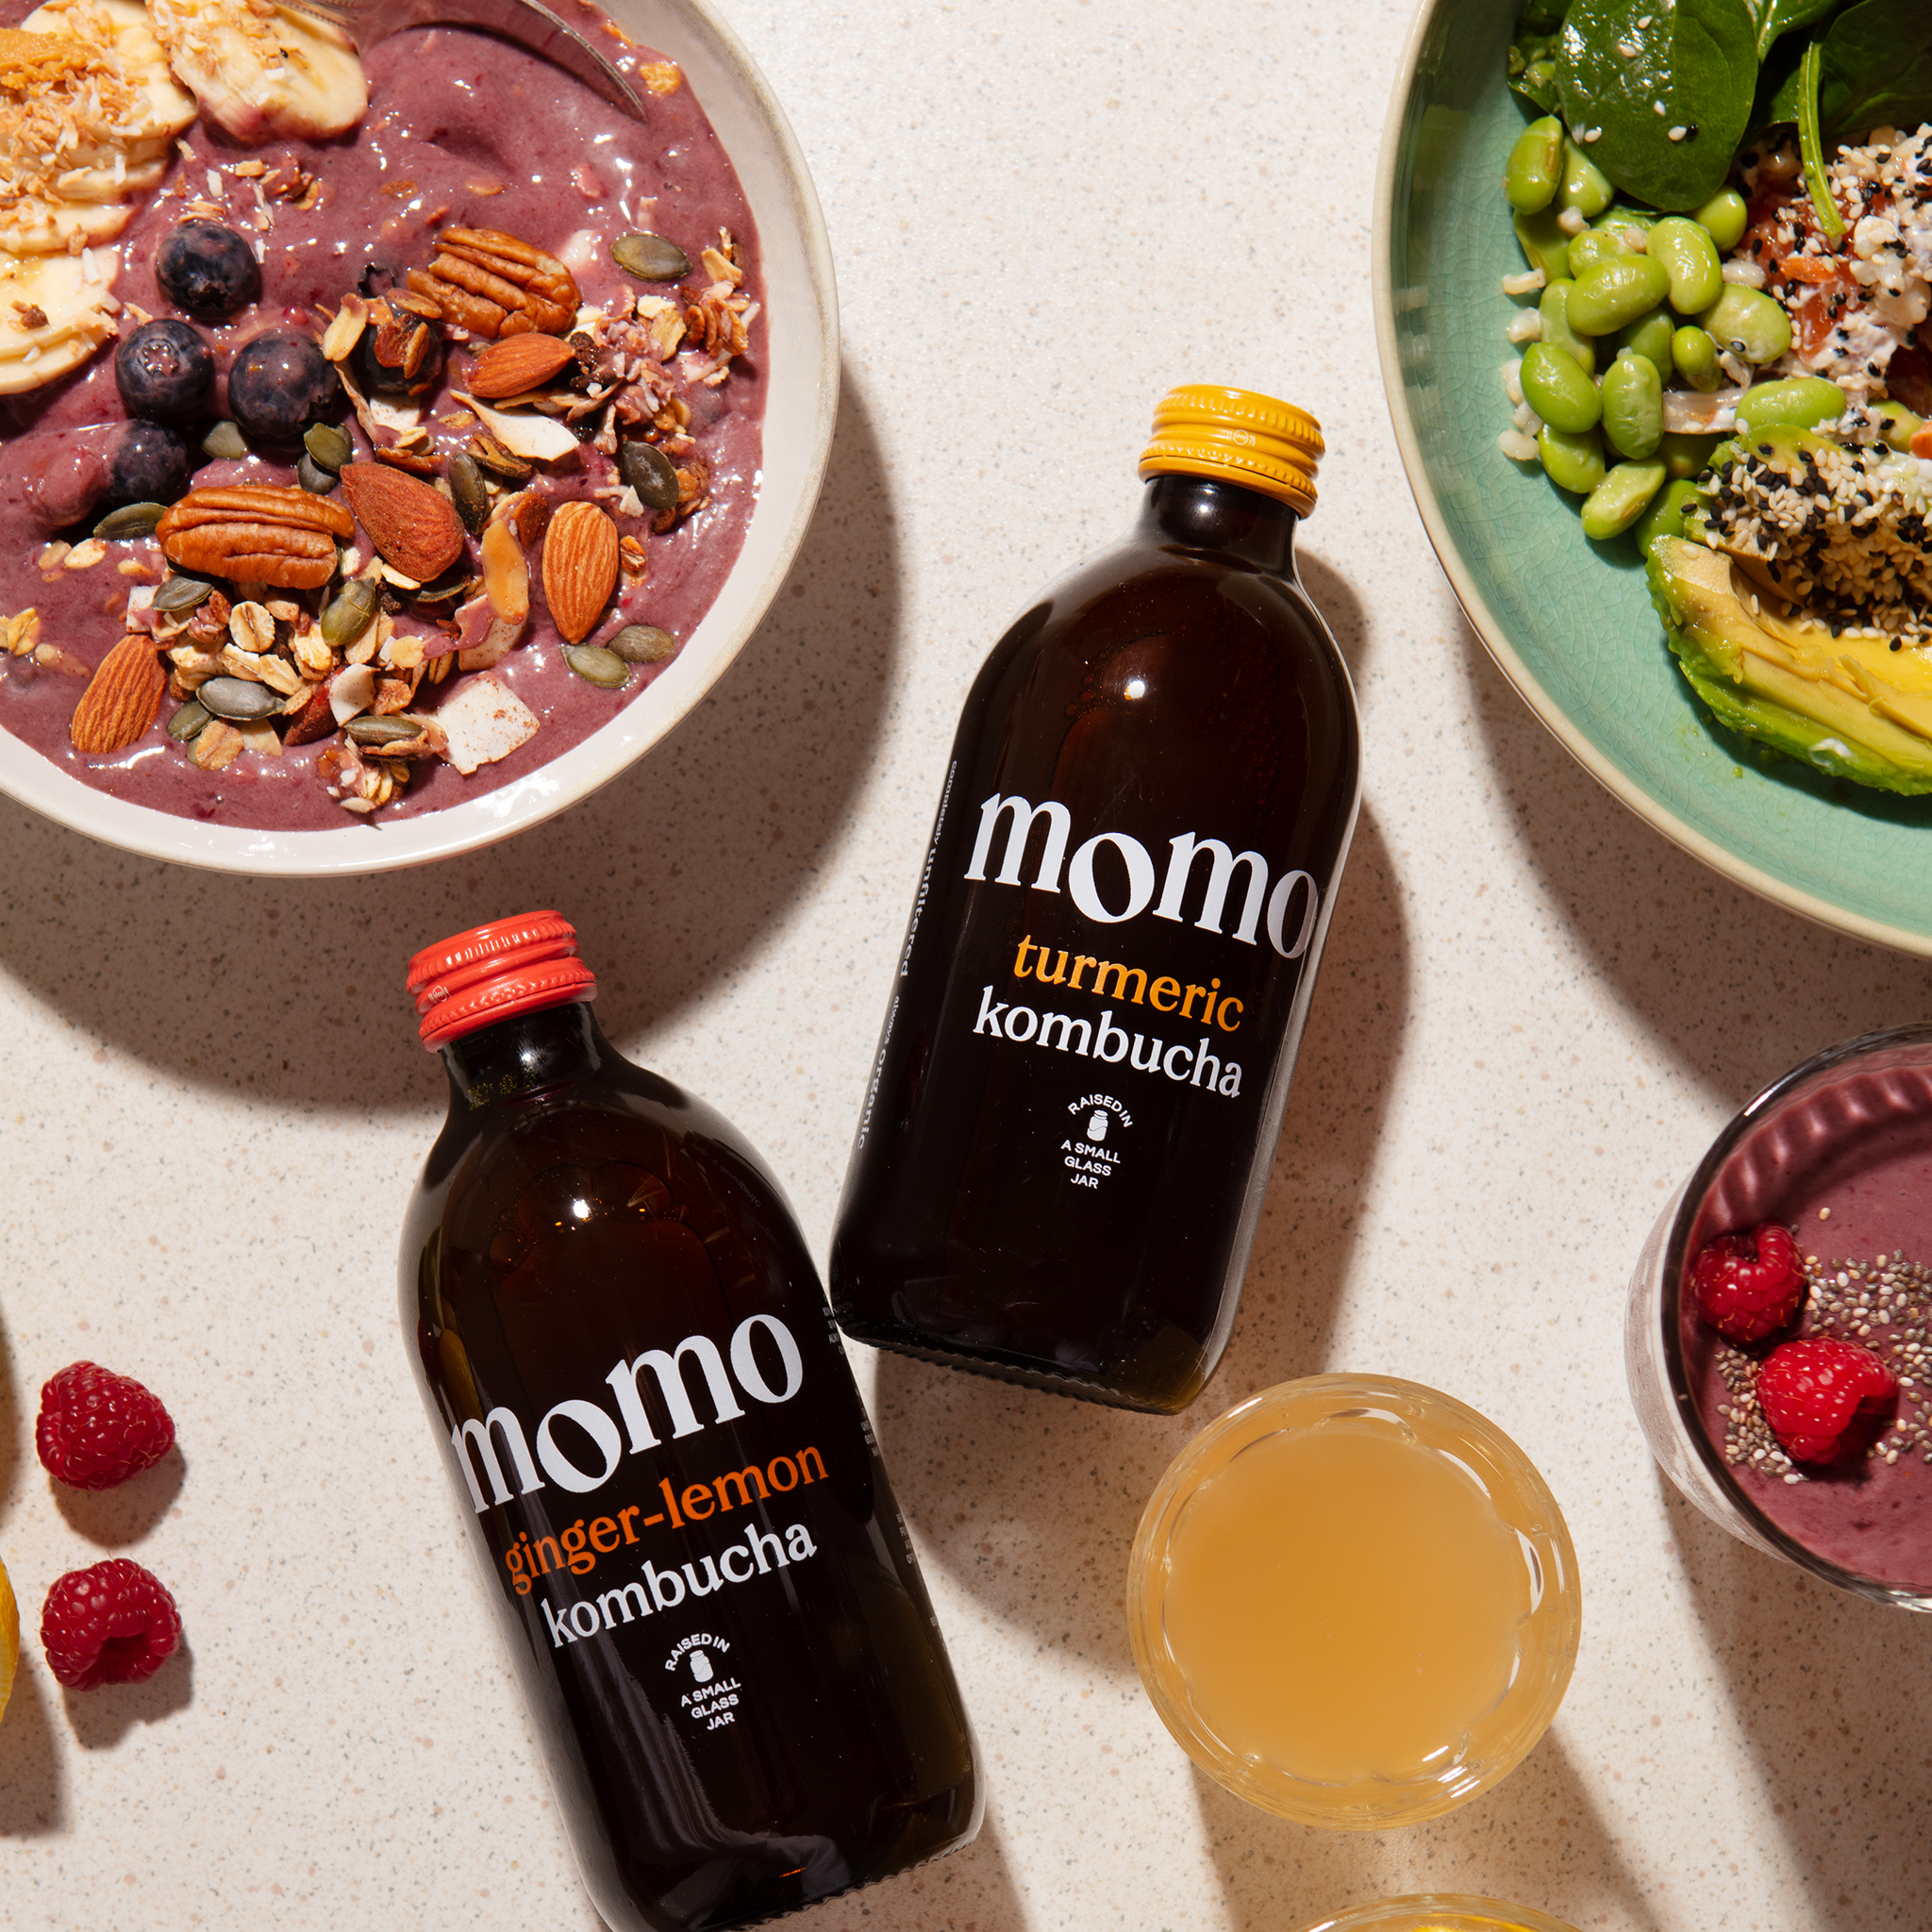 Why MOMO is organic (and why that's important)